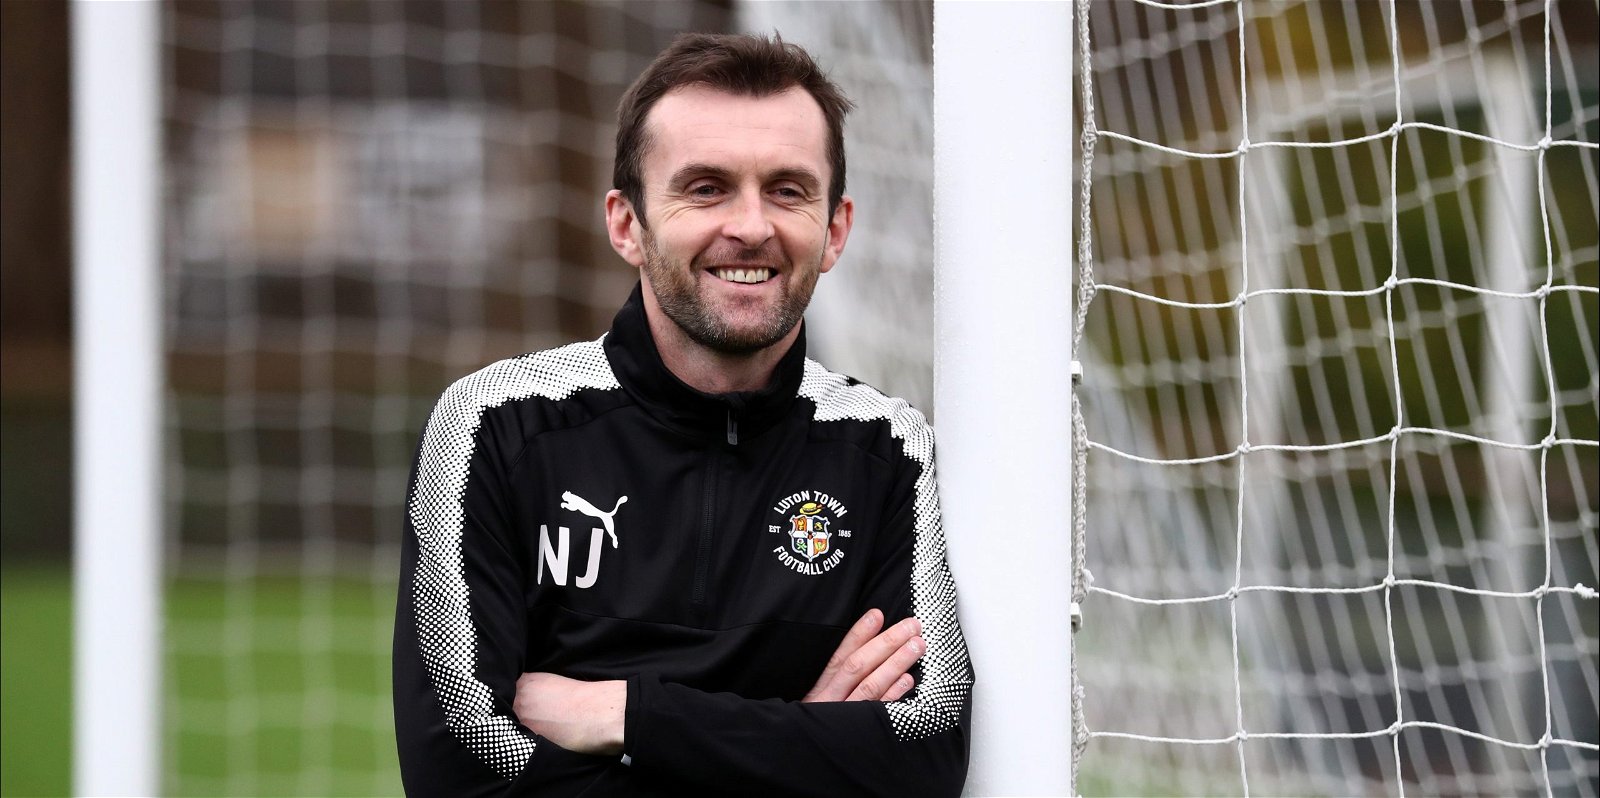 Luton Town, &#8220;There&#8217;s no better club&#8221;- Nathan Jones on his return to Luton Town